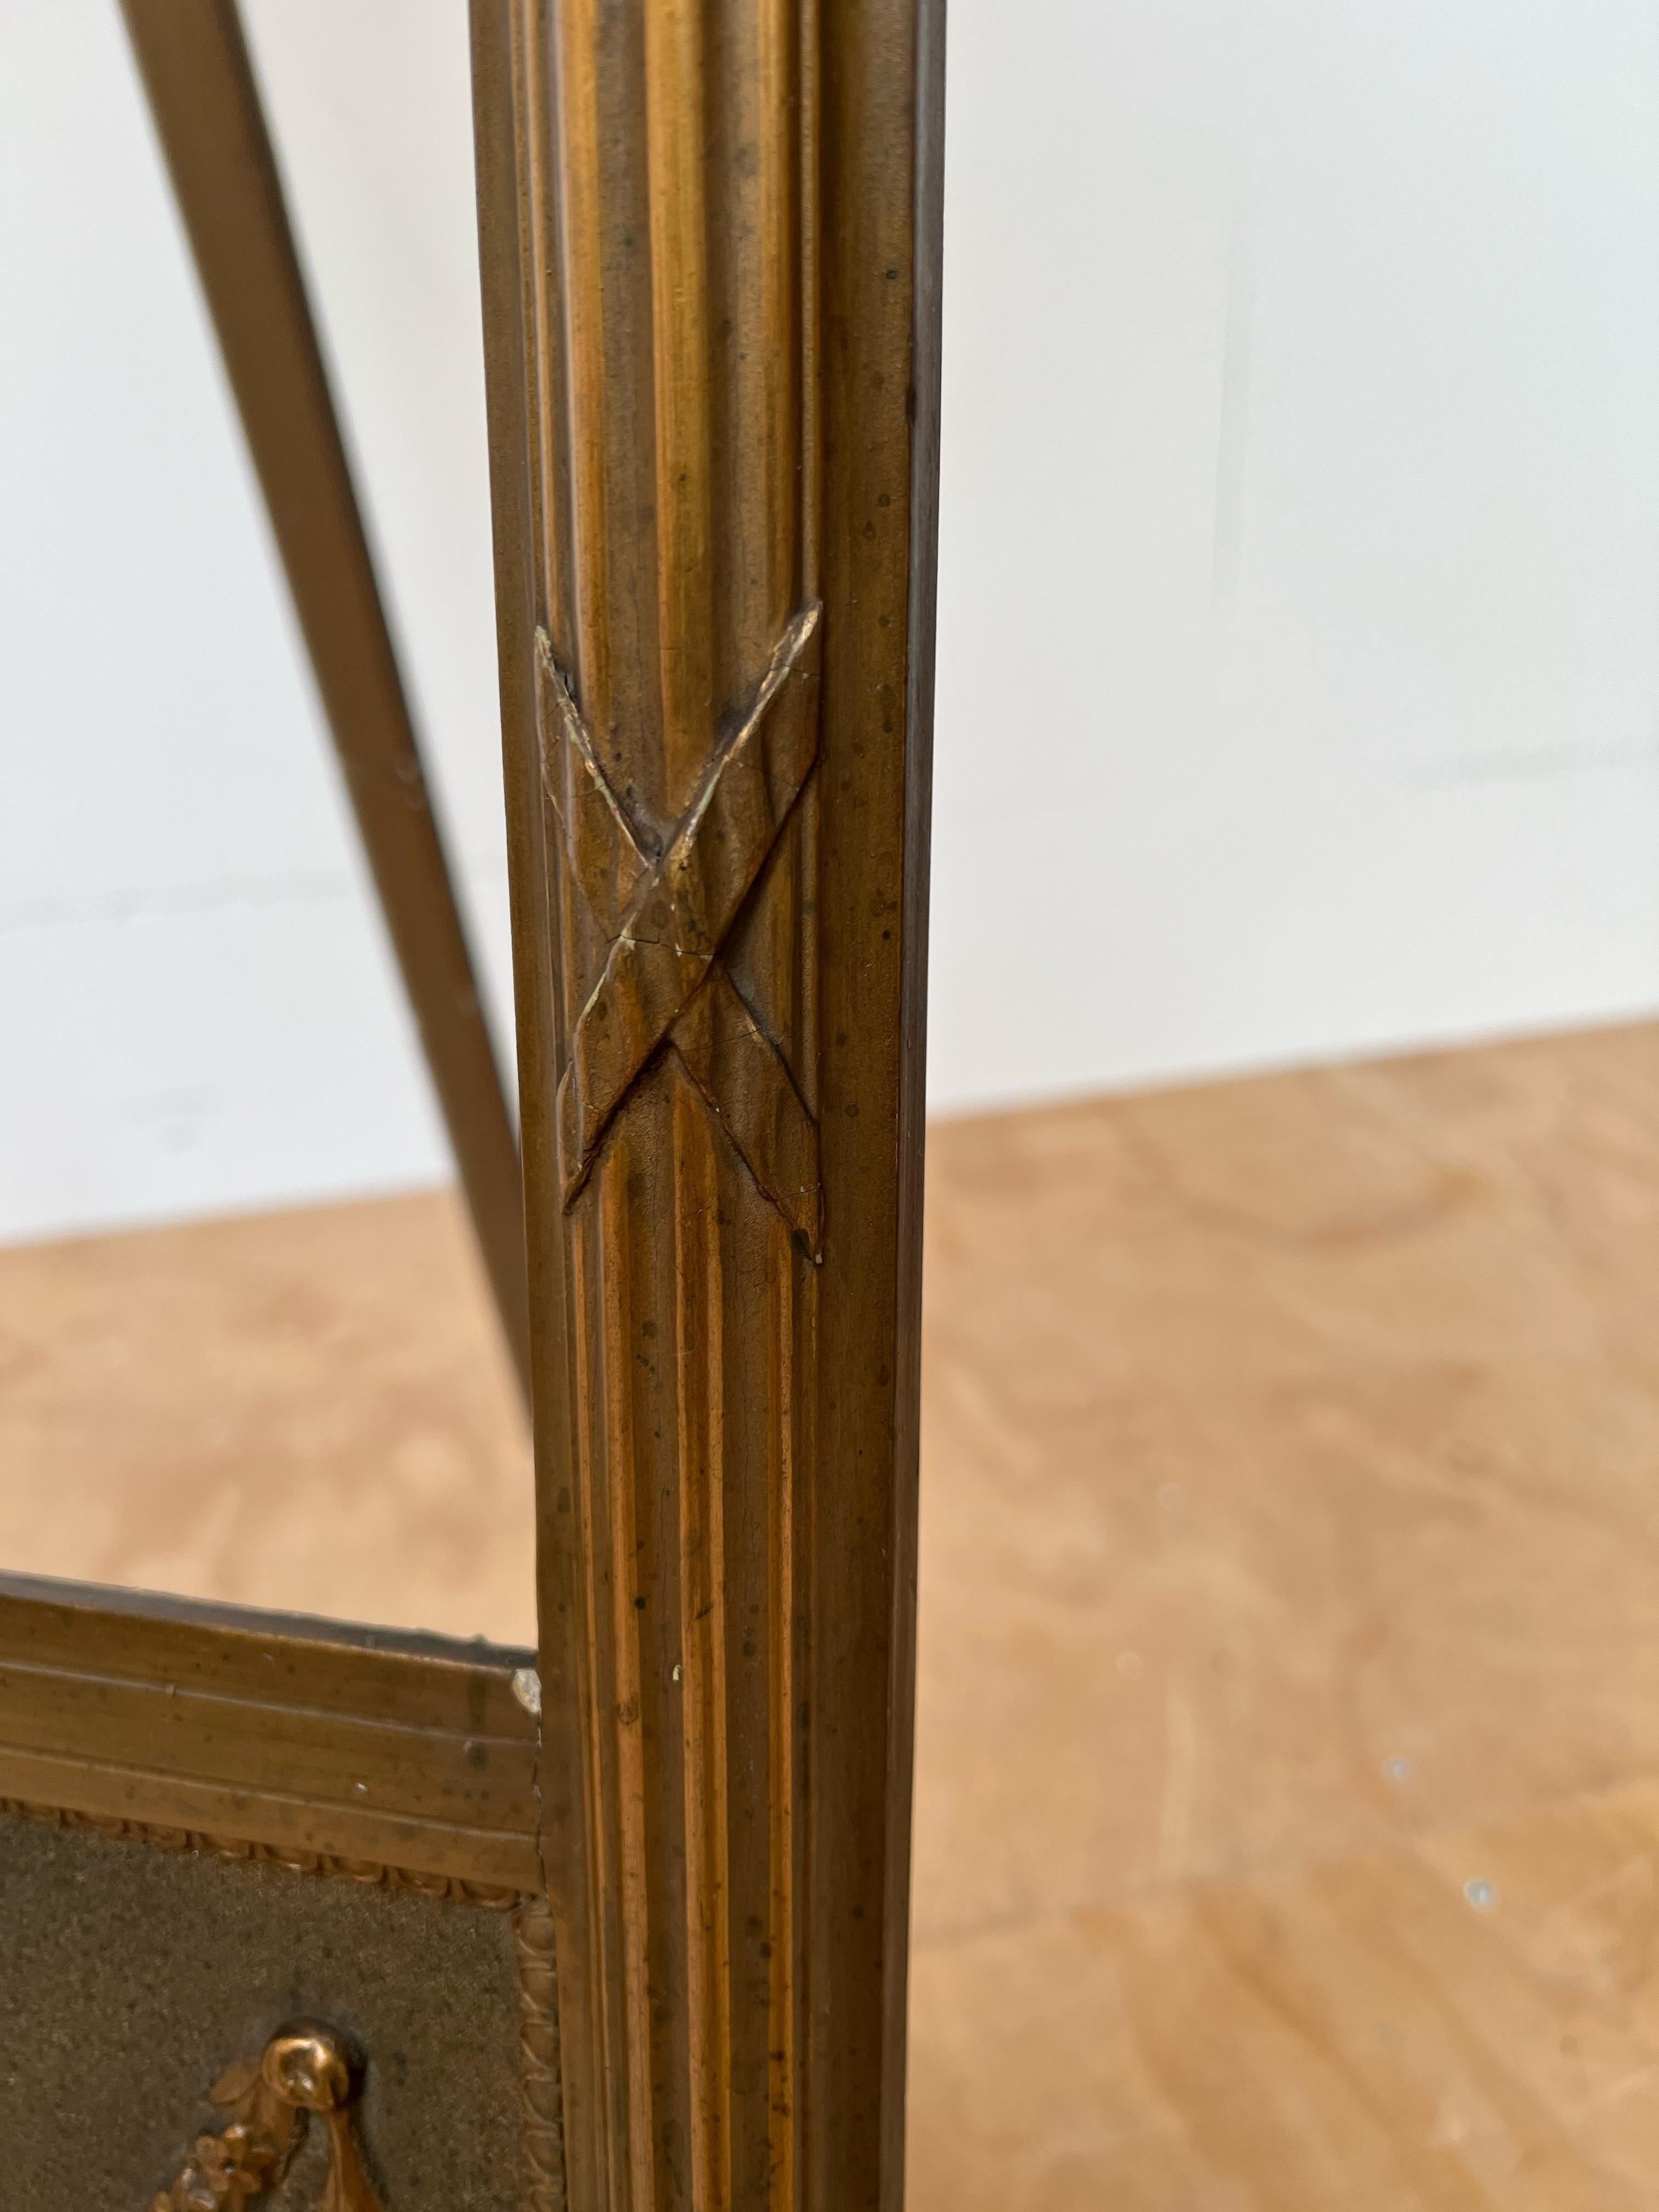 Rare Antique Gilt Wooden Mirror or Picture Floor Easel / Display Stand, 1900s For Sale 7